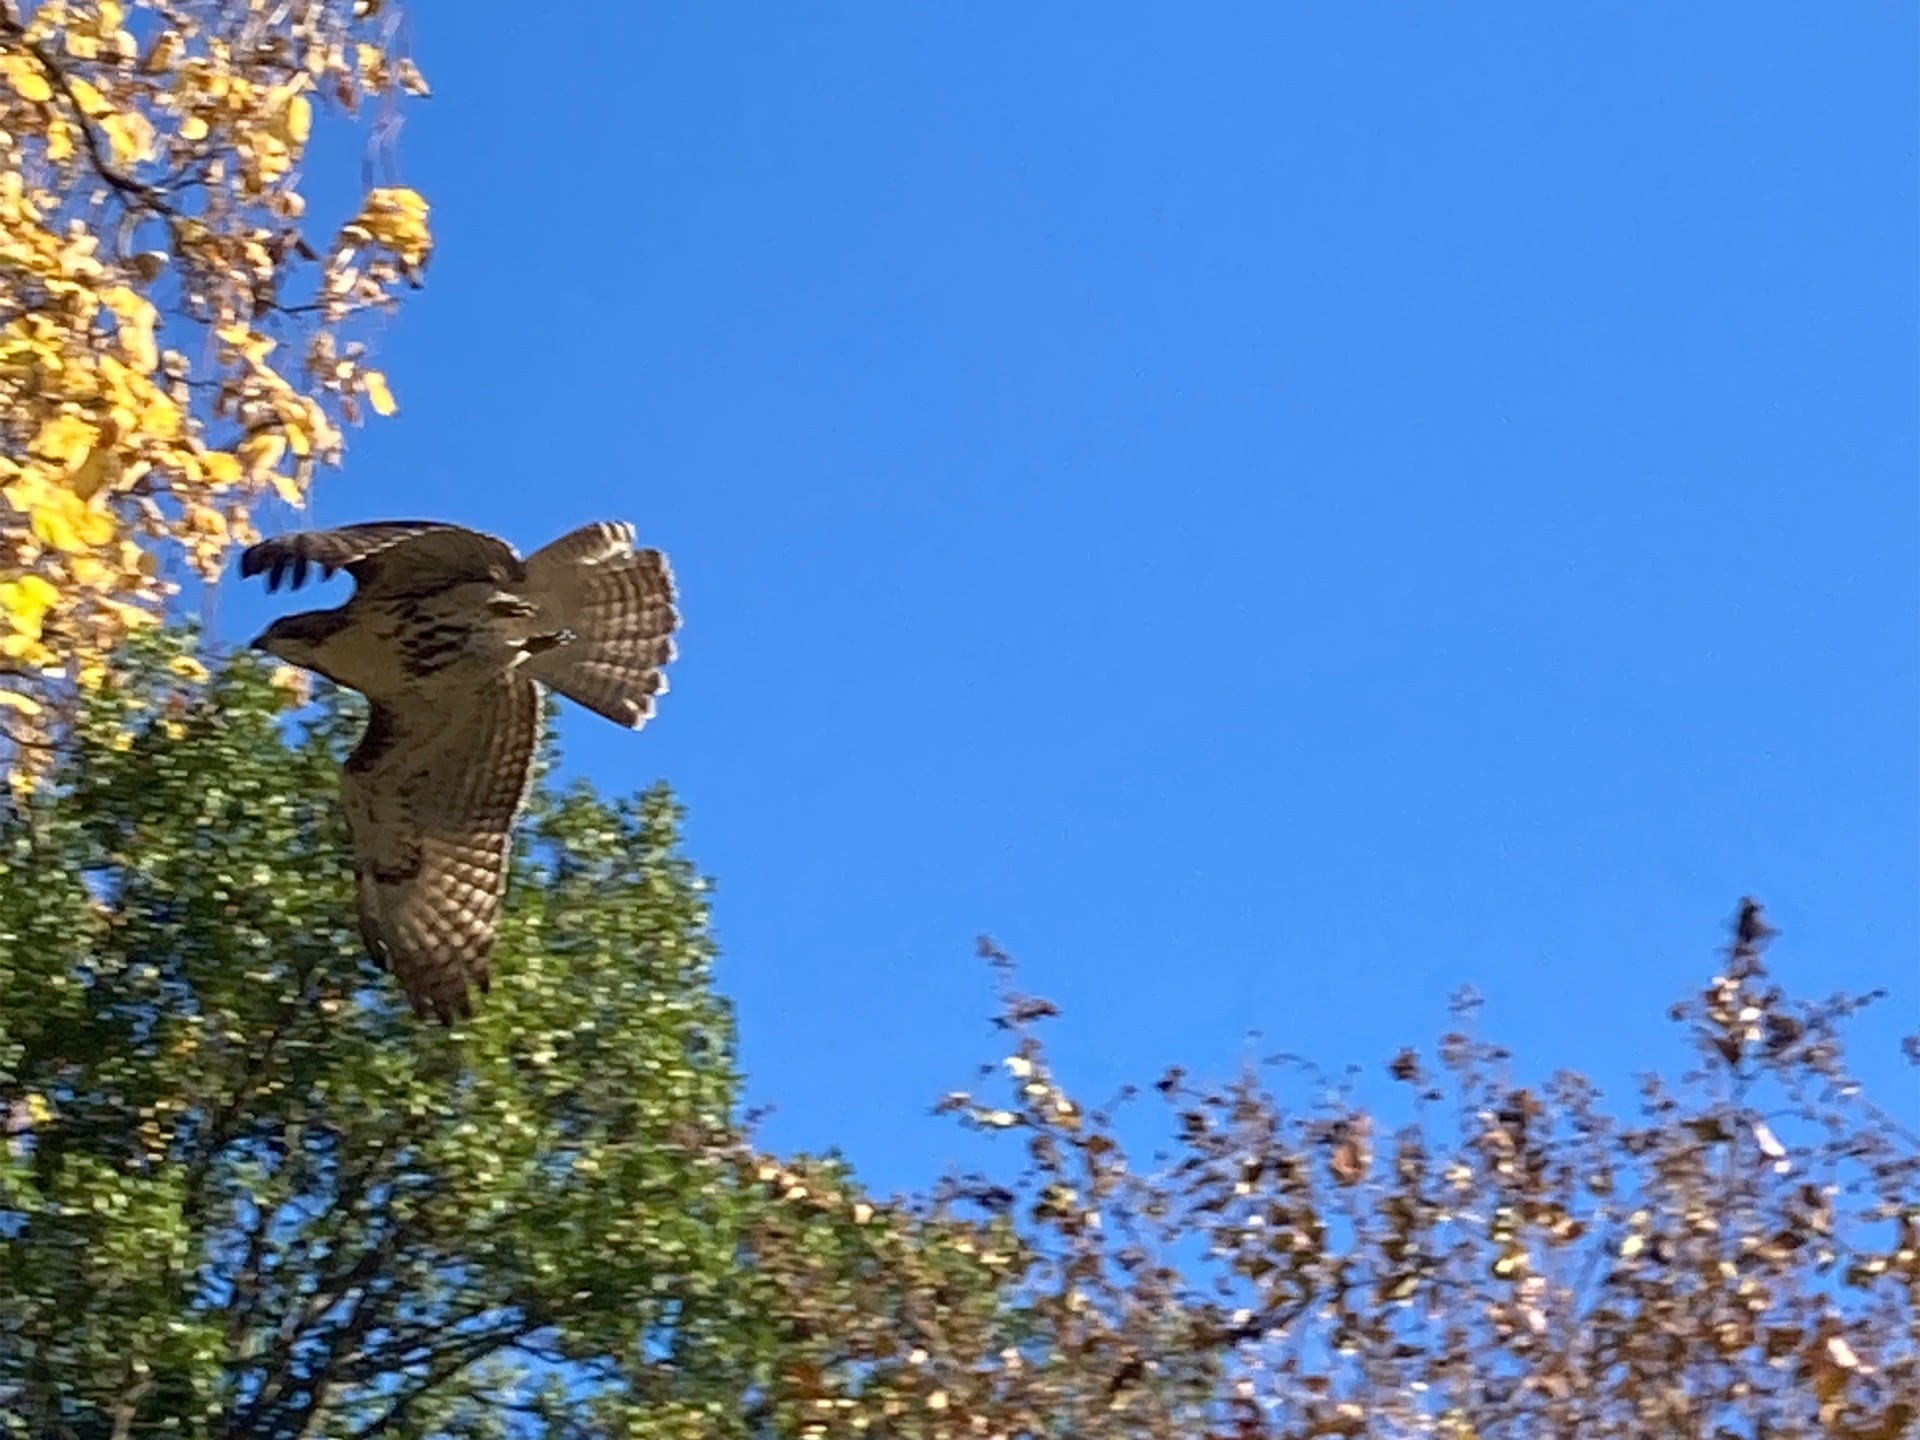 A quick and lucky capture of a red-tailed hawk, Buteo jamaicensis, in flight.